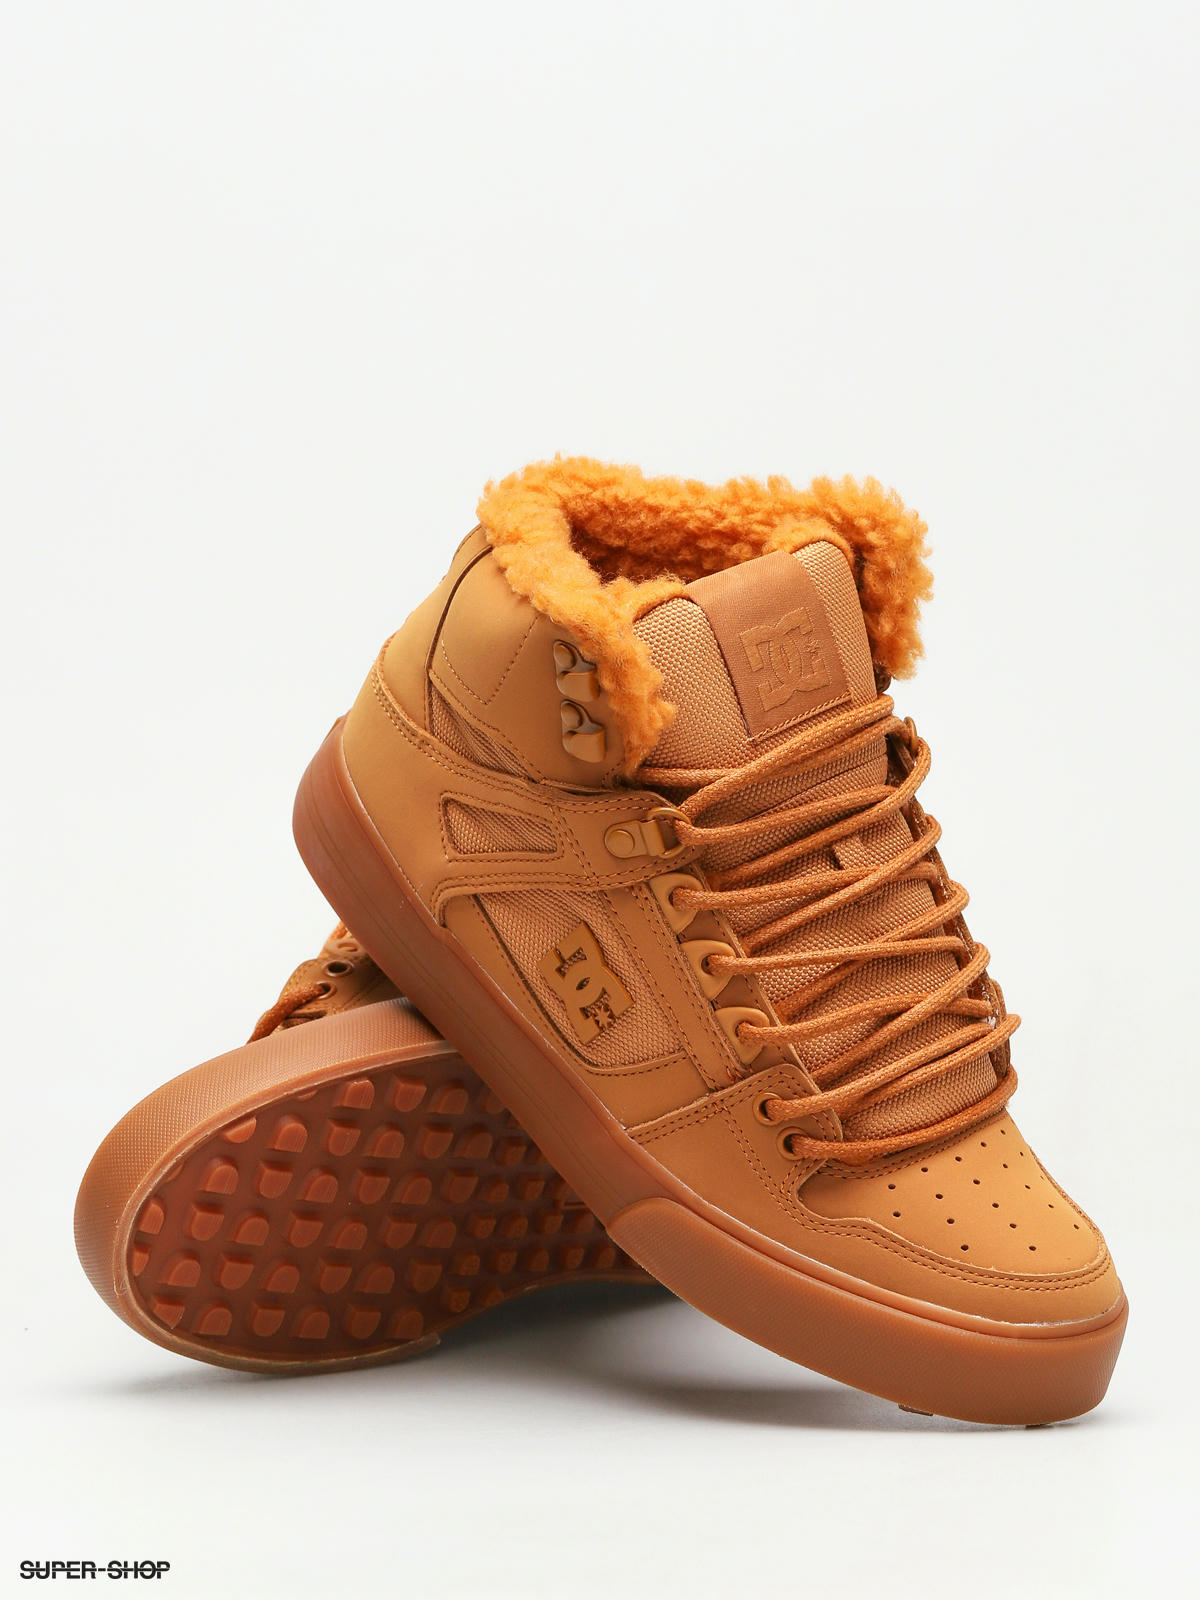 White Wheat DC Shoes Pure High Top WC WNT 